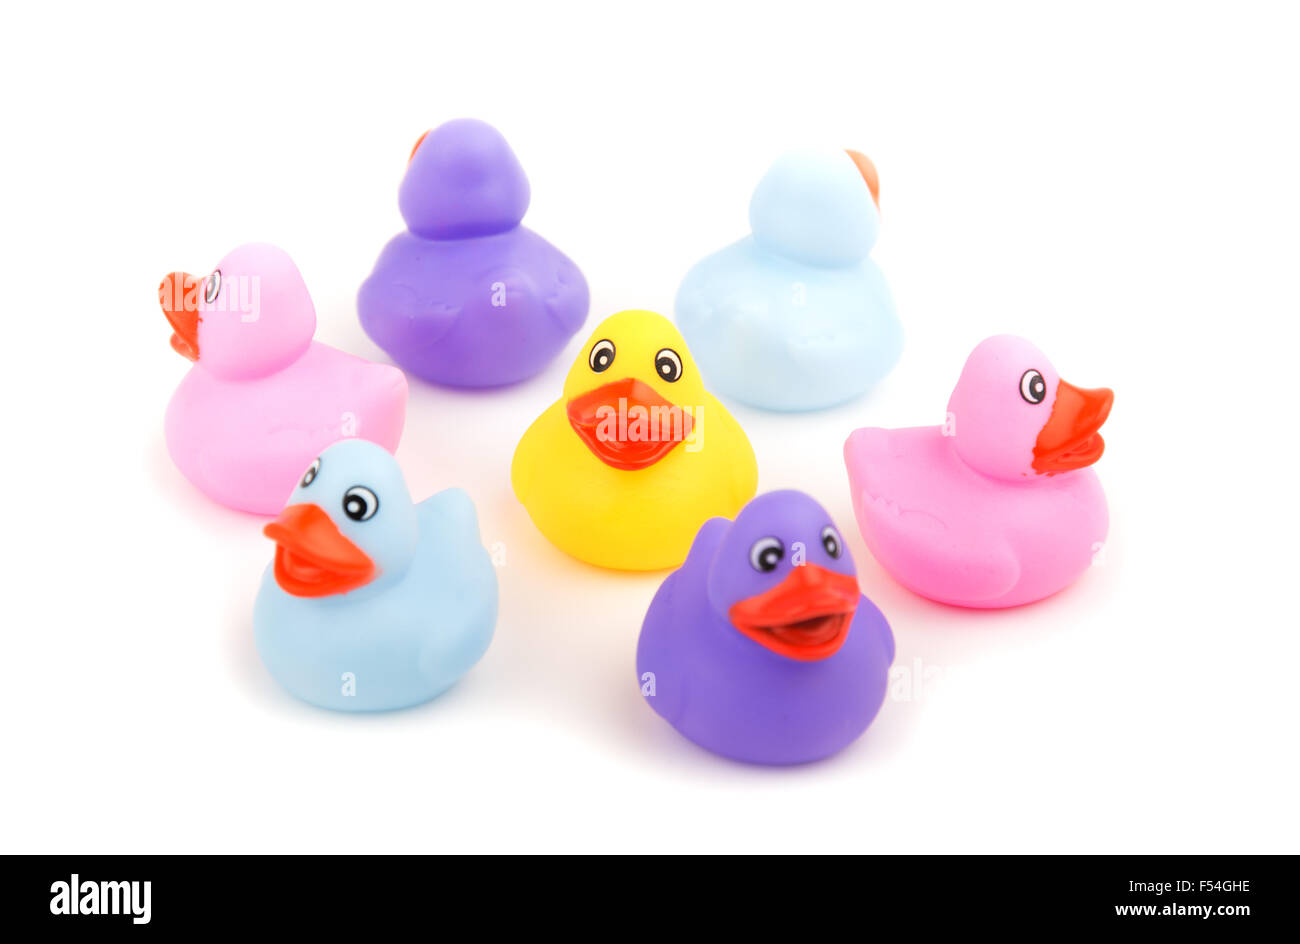 Rubber ducks with their backs turned to one in the middle - concept of shunning or avoiding, focus on the yellow duckling Stock Photo